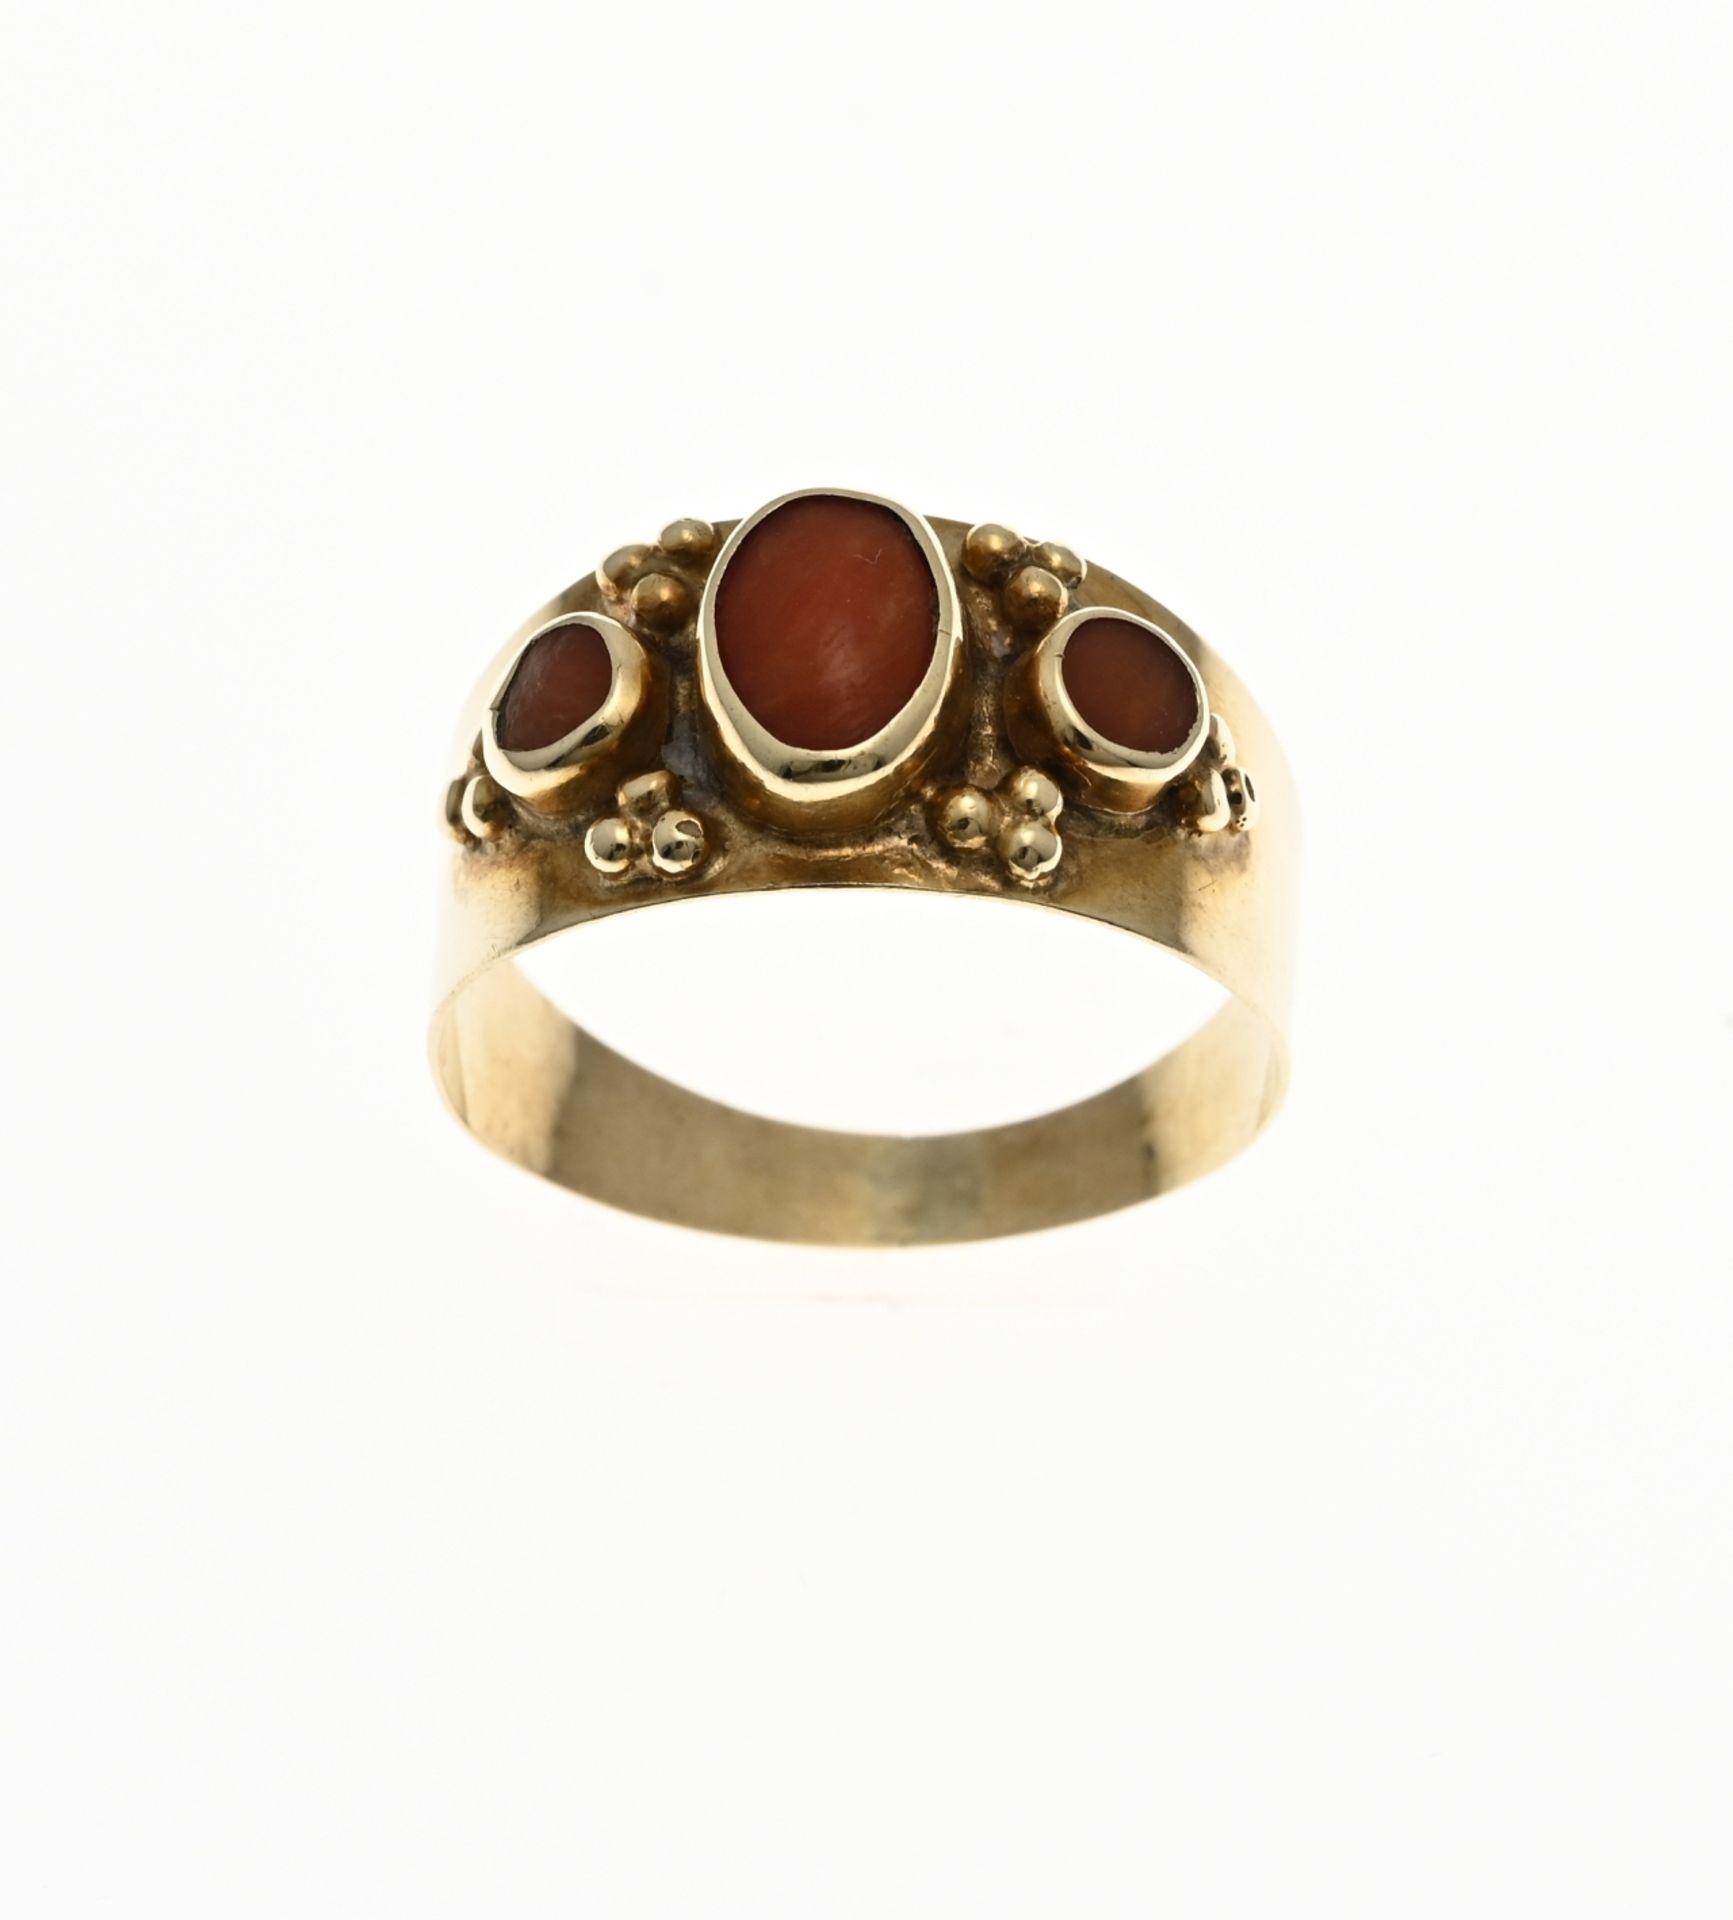 Gold band ring with red coral